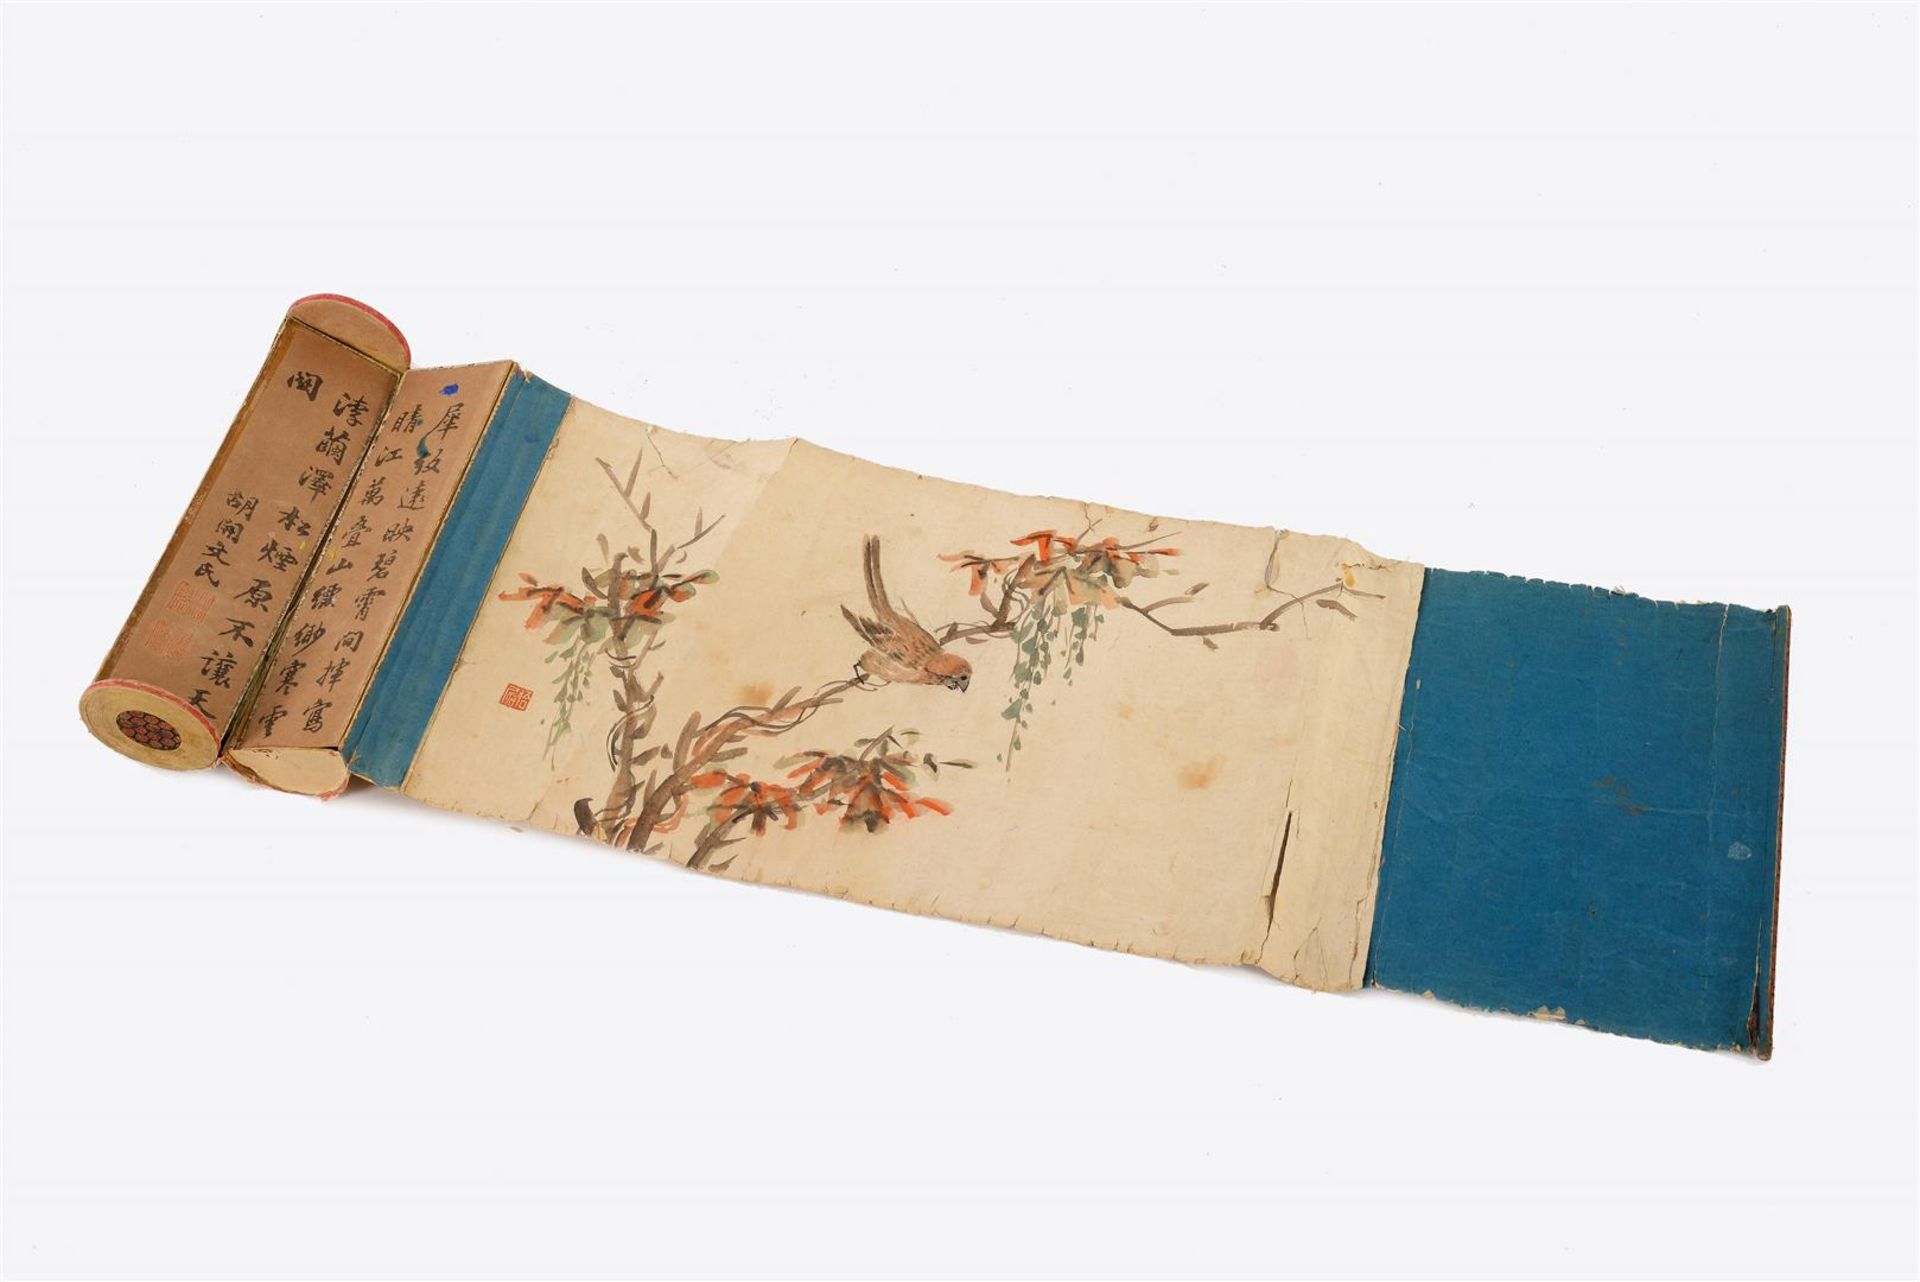 A scroll depicting a bird on a branch, unrolling the scroll it reveals a stamp case with colored ink